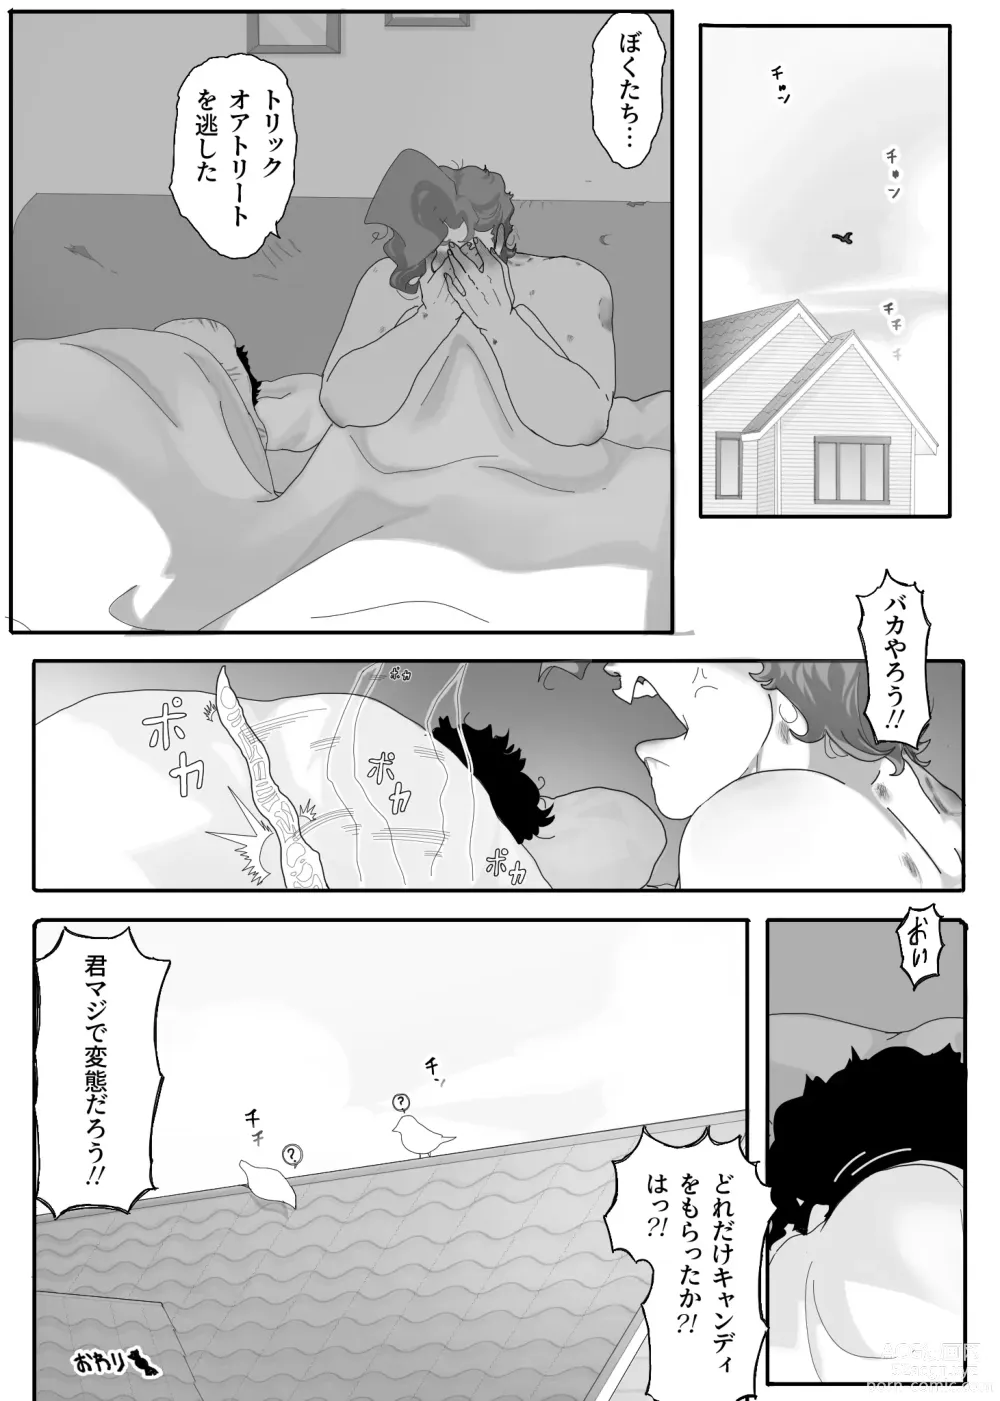 Page 27 of doujinshi TRICKS with TREATS